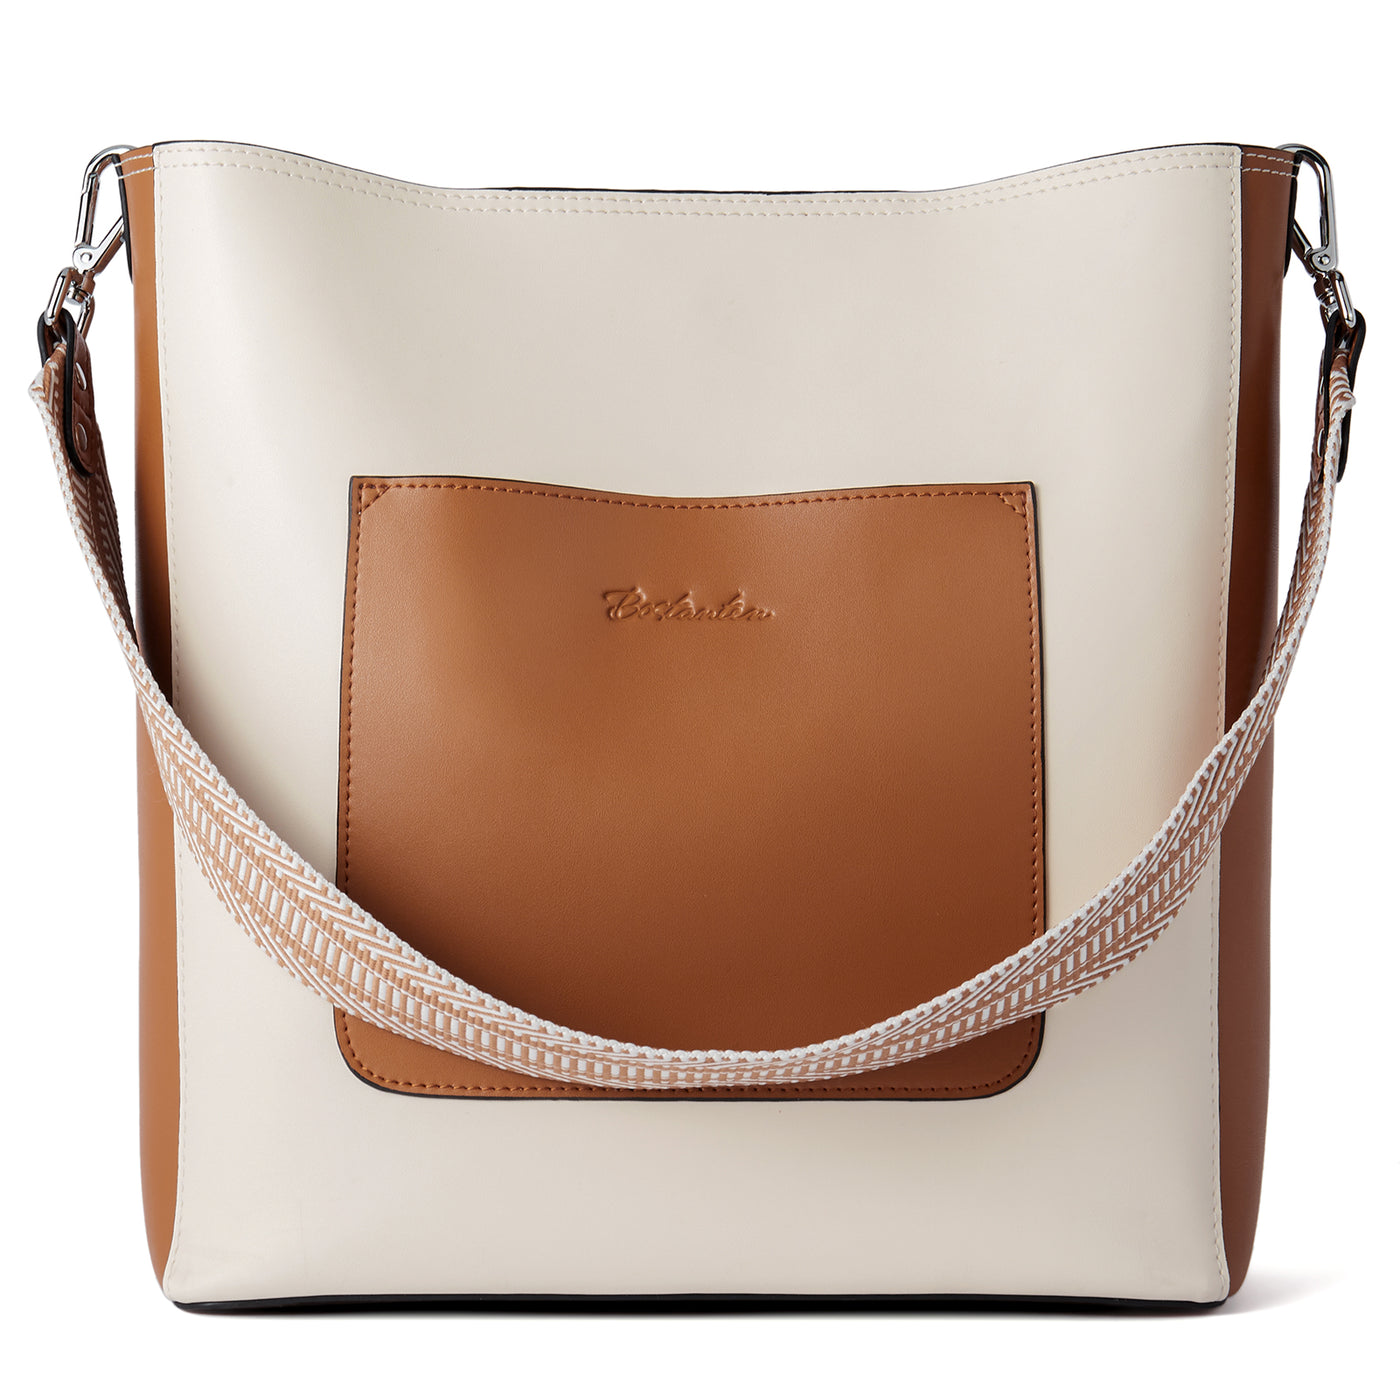 Hobo Crossbody Bag, Leather Purse | Mayko Bags Camel / Yes Lining for Me